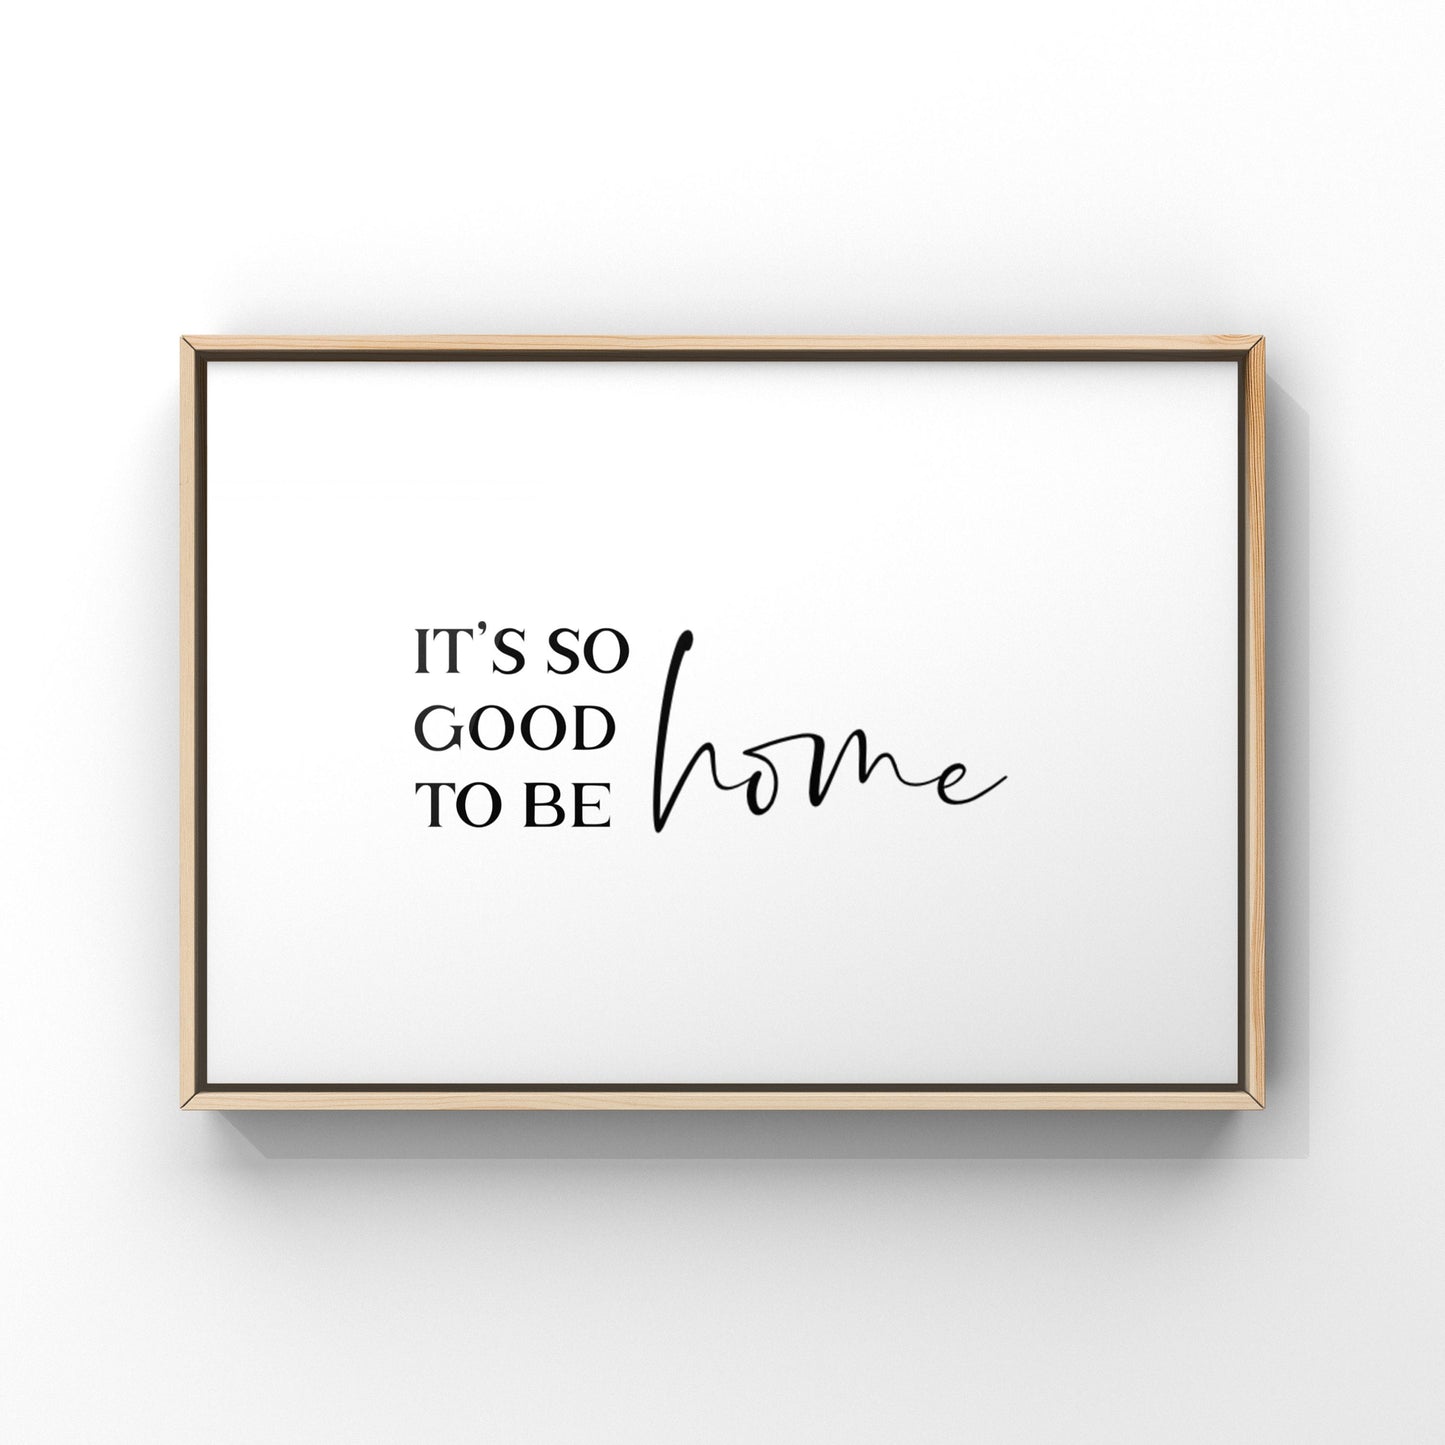 It’s so good to be home, It’s so good to be home print, It’s so good to be home sign, Home Decor Wall Art, It’s good to be home,Living Room